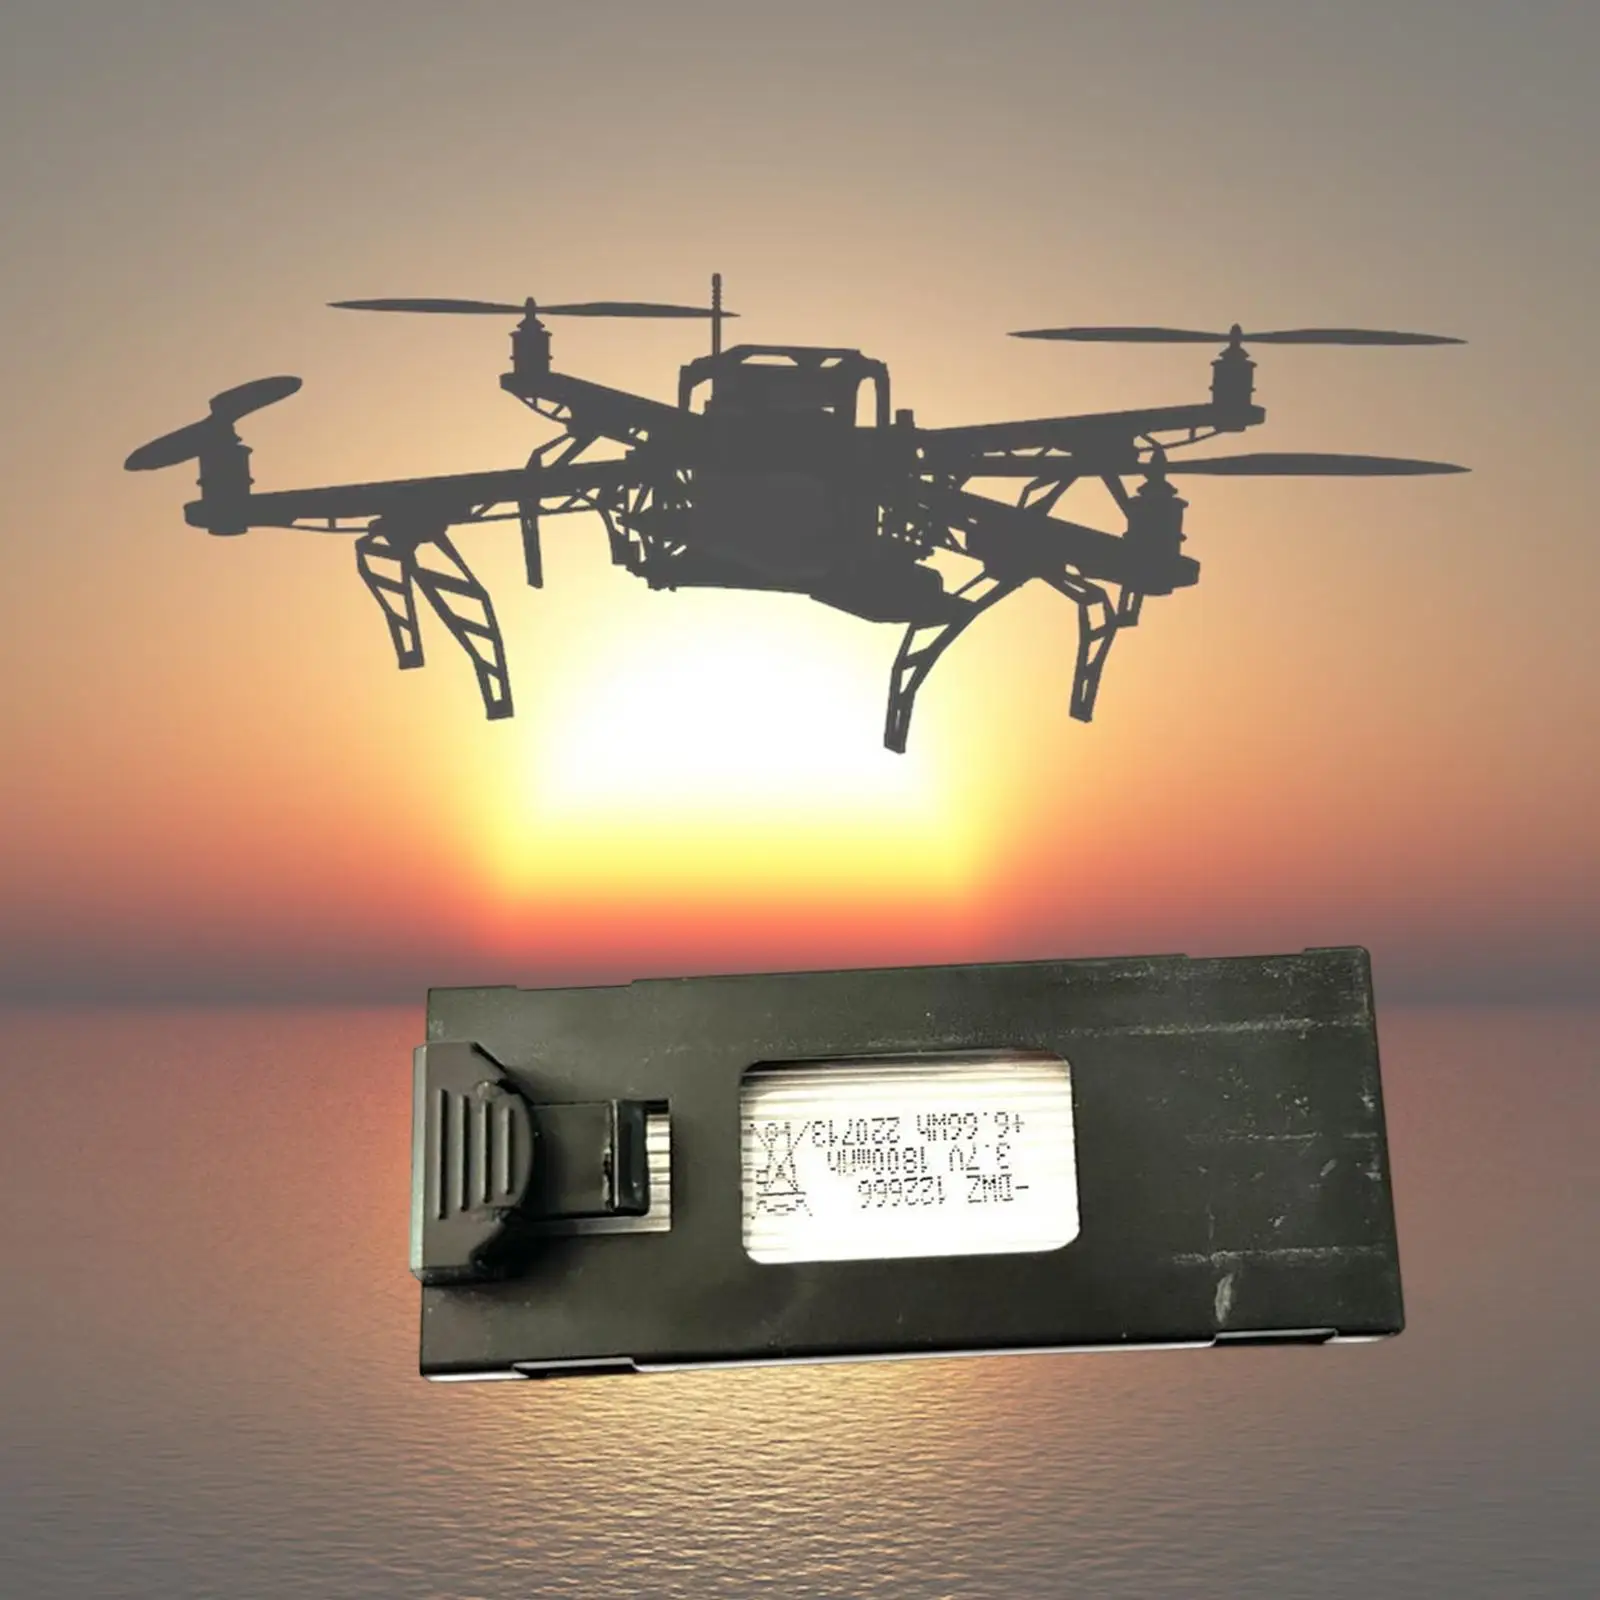 3.7V 1800mAh Lithium battery easily Install for H106 RC Aircraft RC Quadcopter RC Helicopter